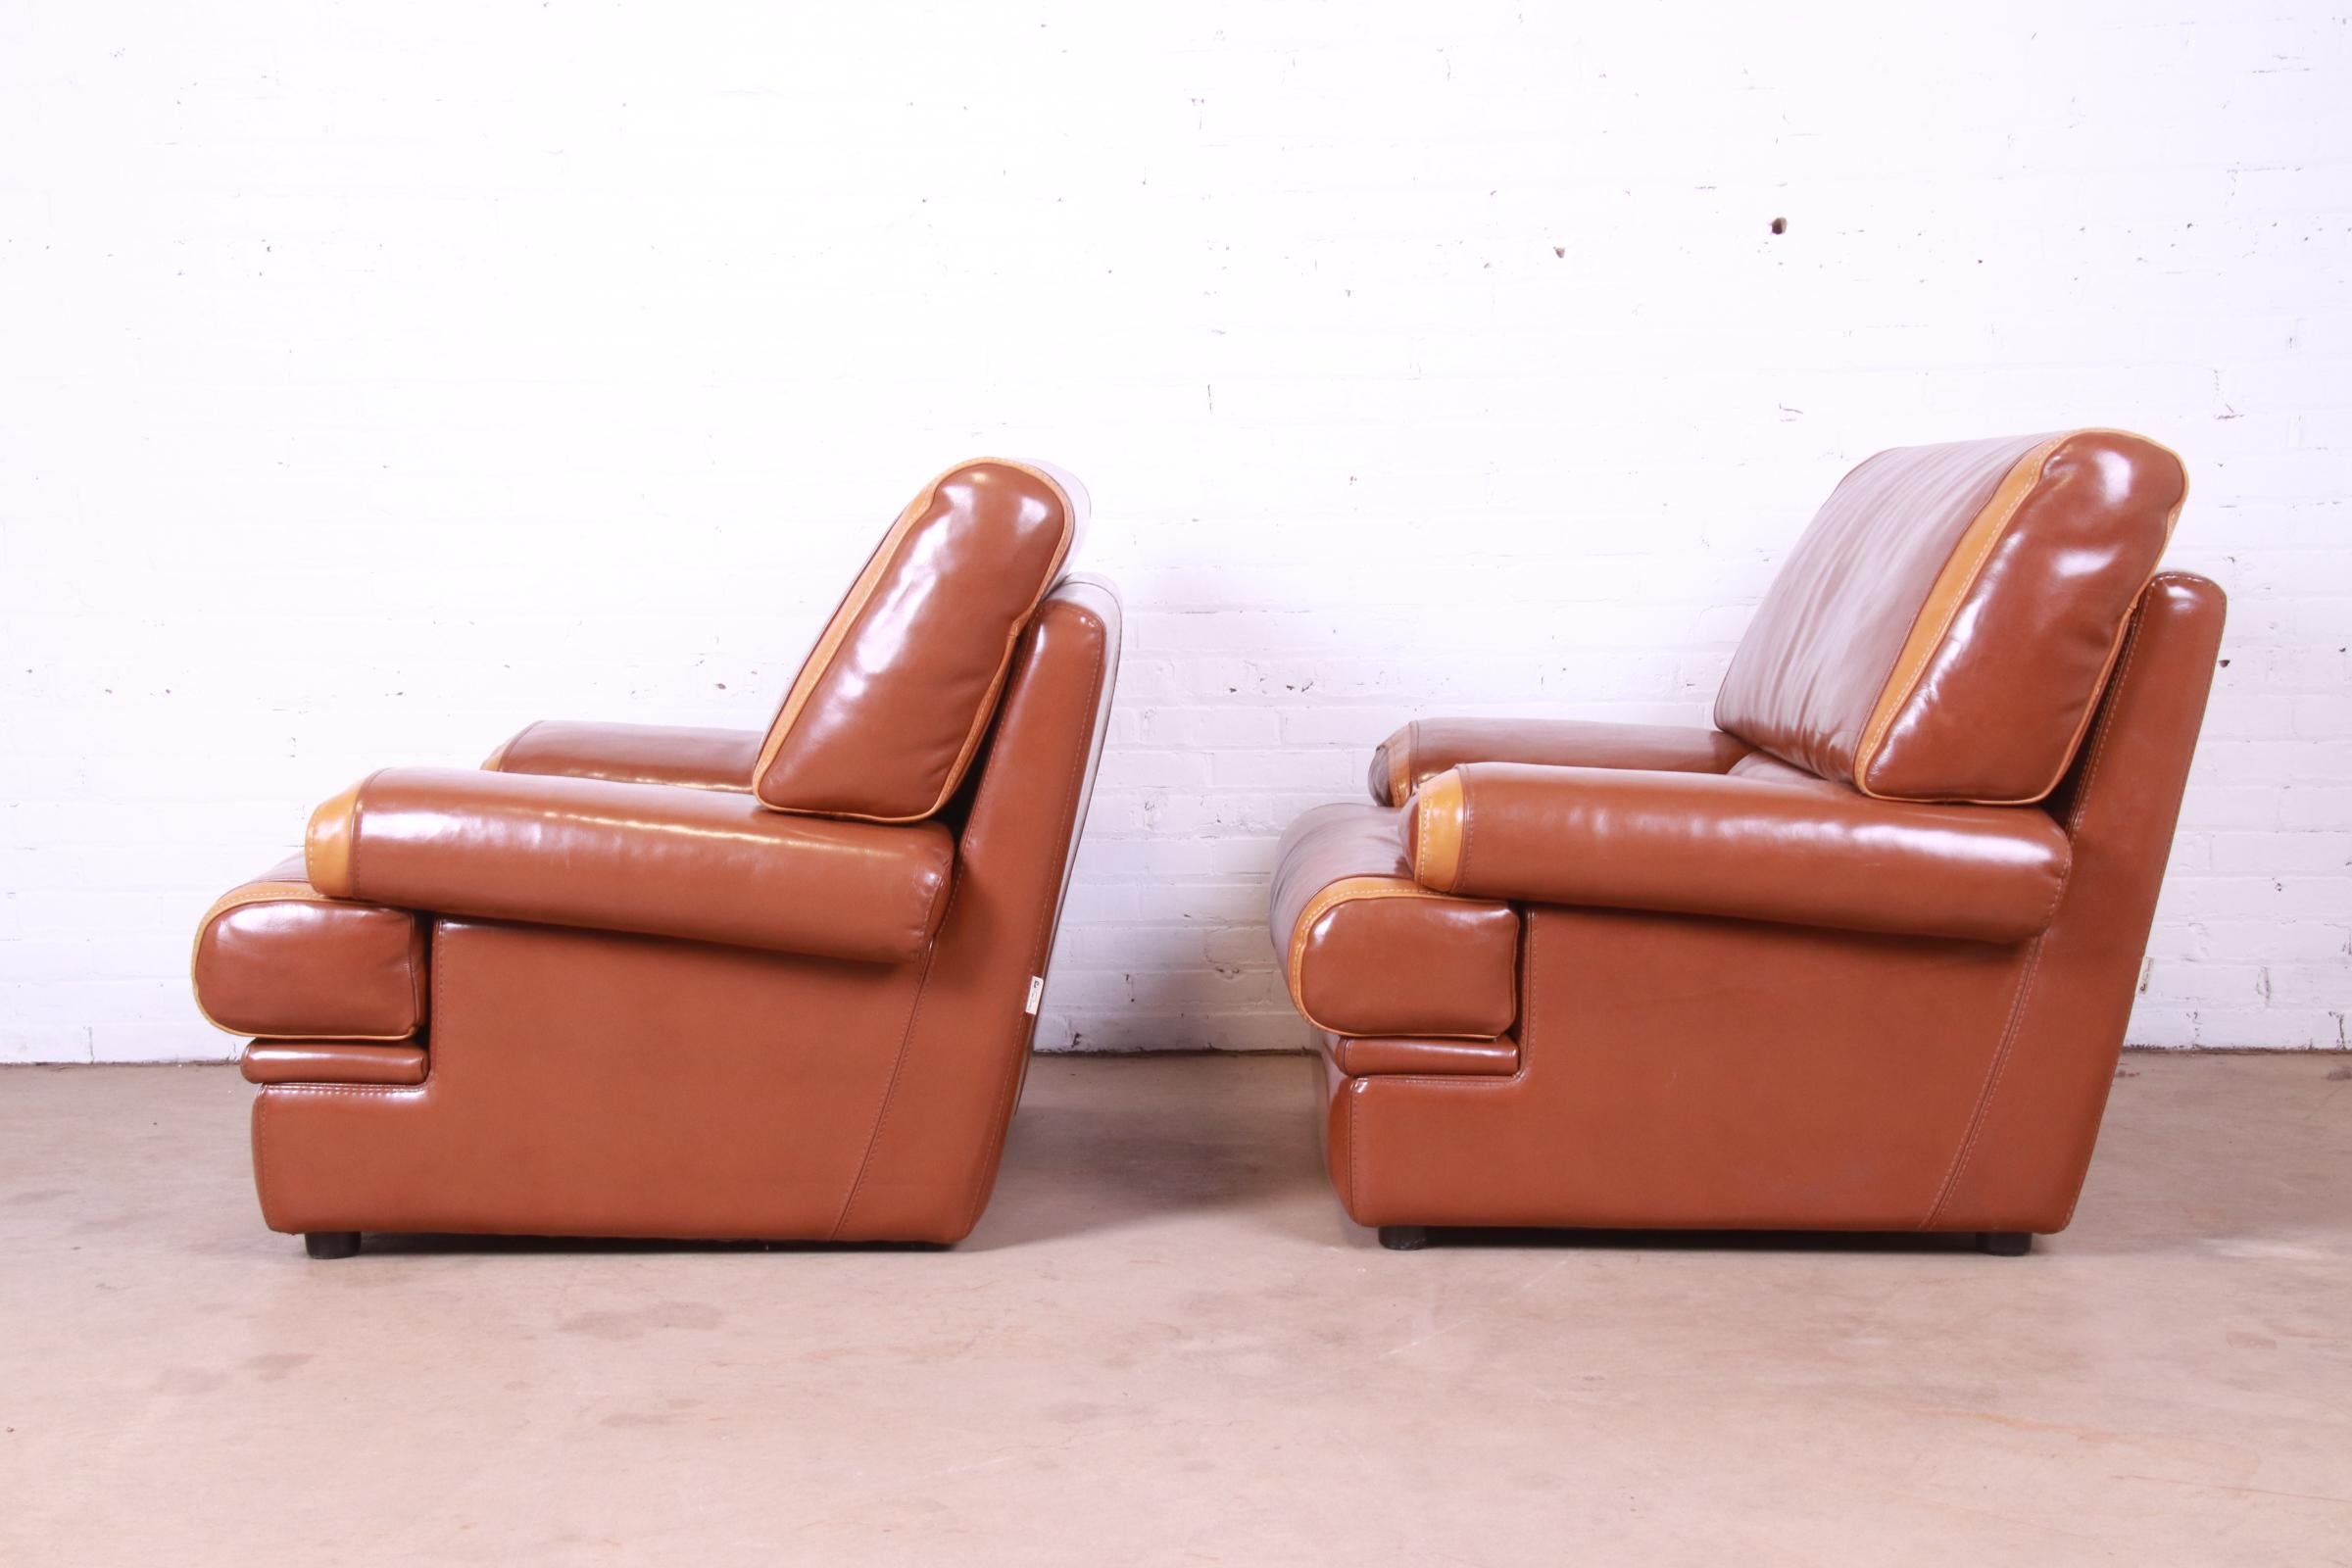 Pierre Cardin French Art Deco Oversized Leather Lounge Chairs, Pair 10